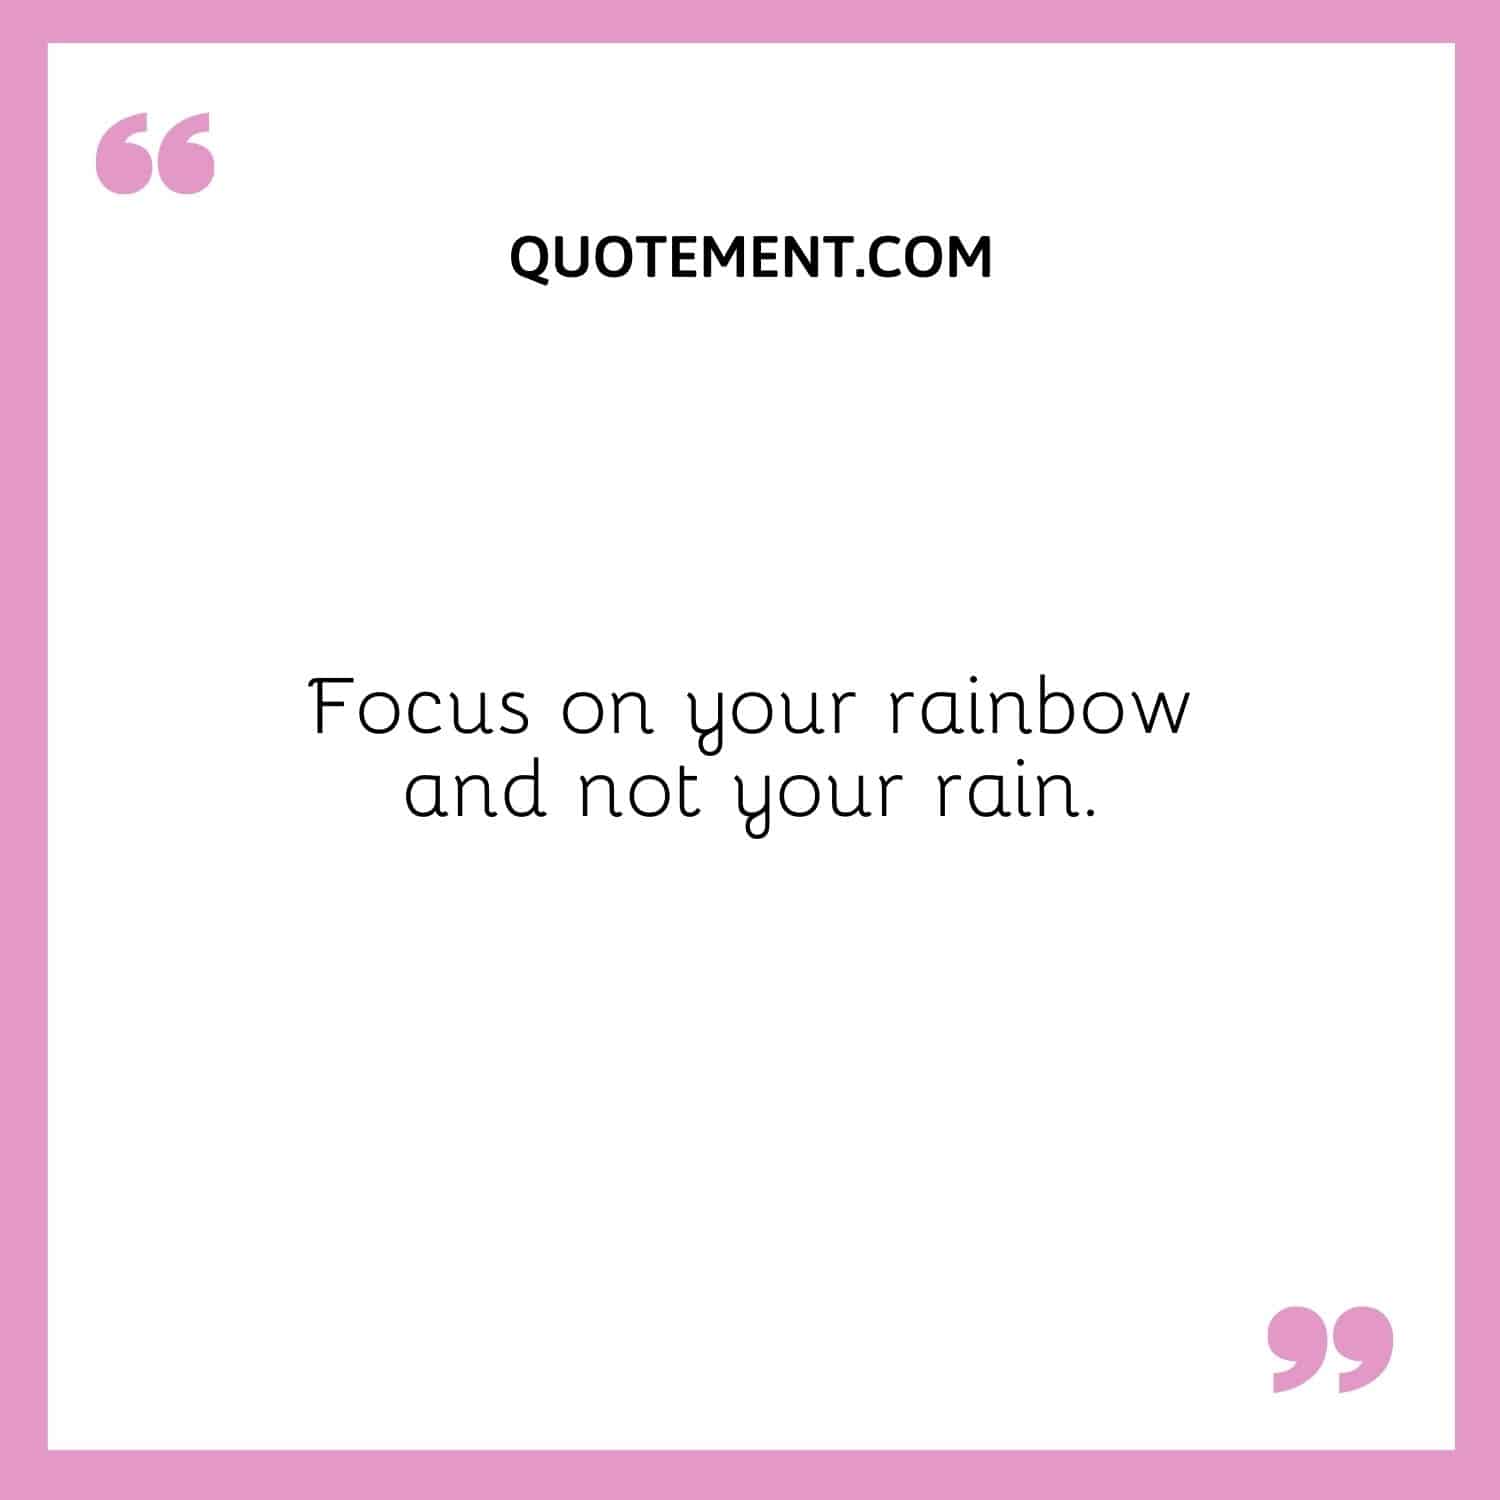 Focus on your rainbow and not your rain